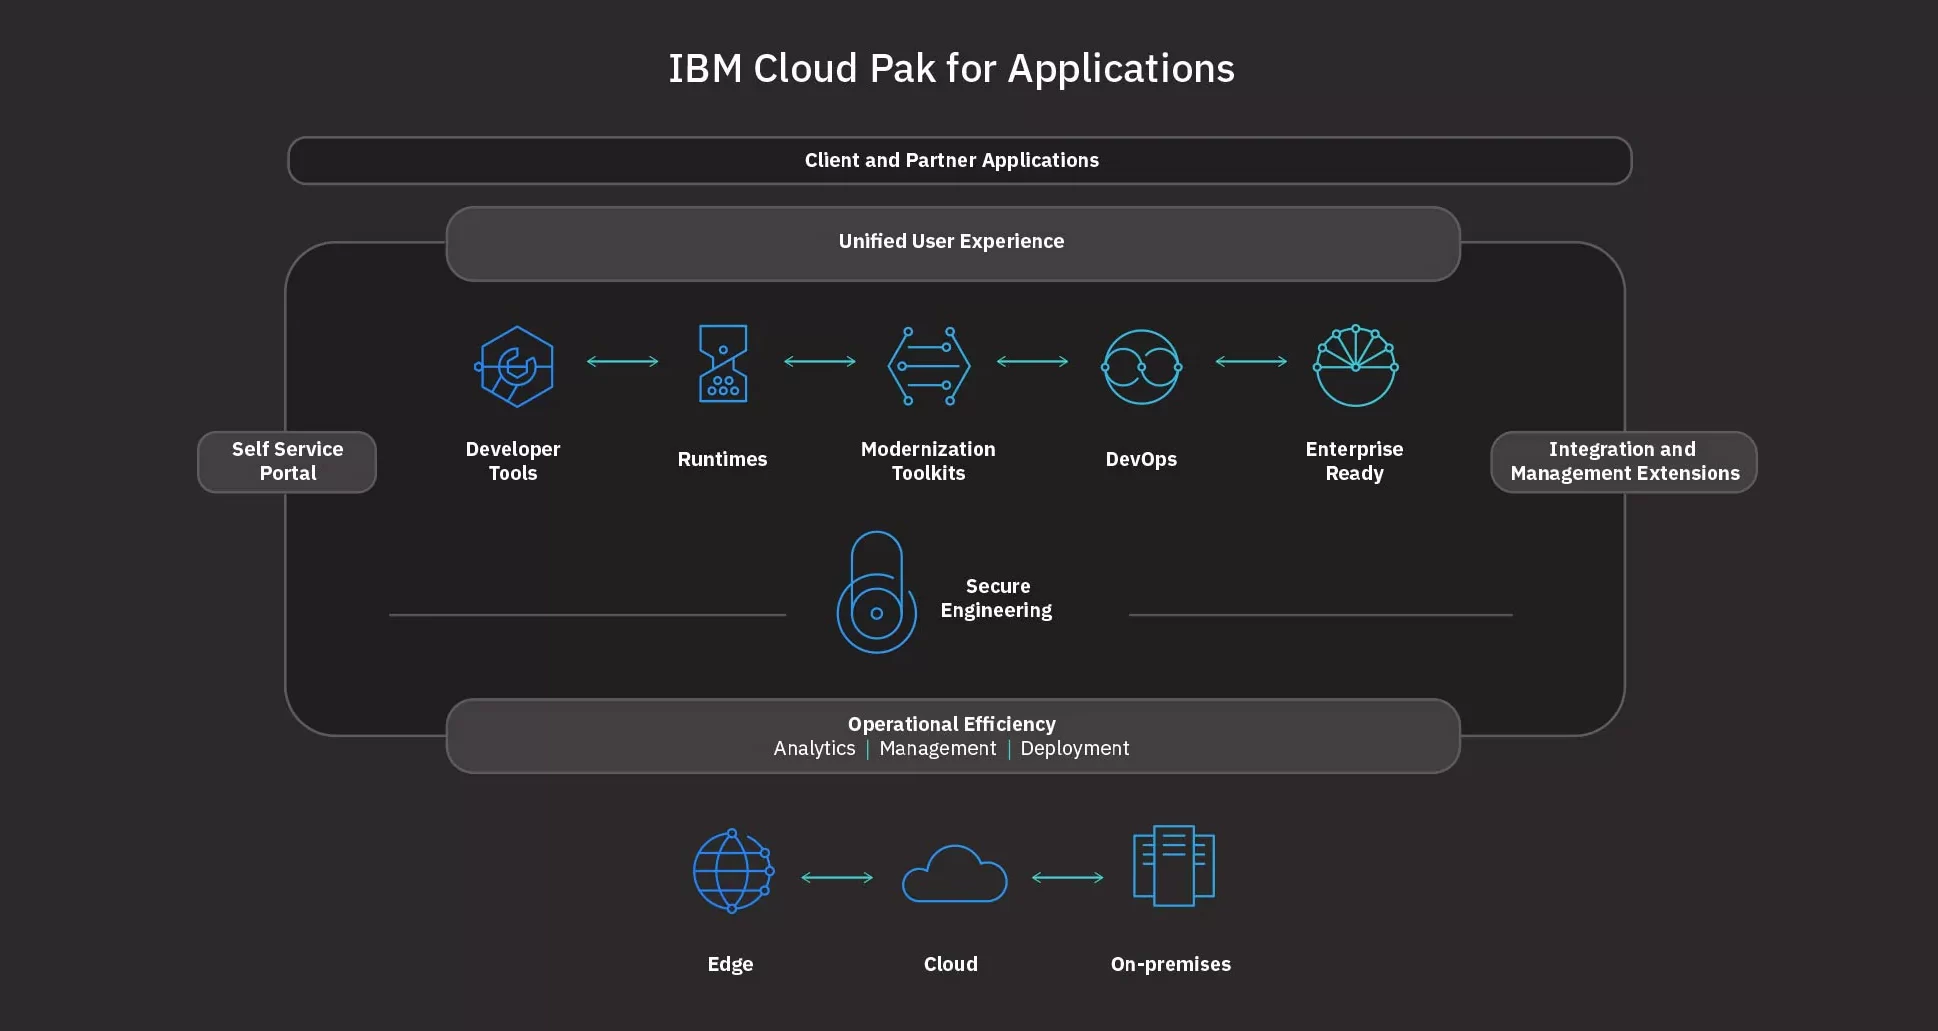 Benefits of IBM Cloud Pak for applications